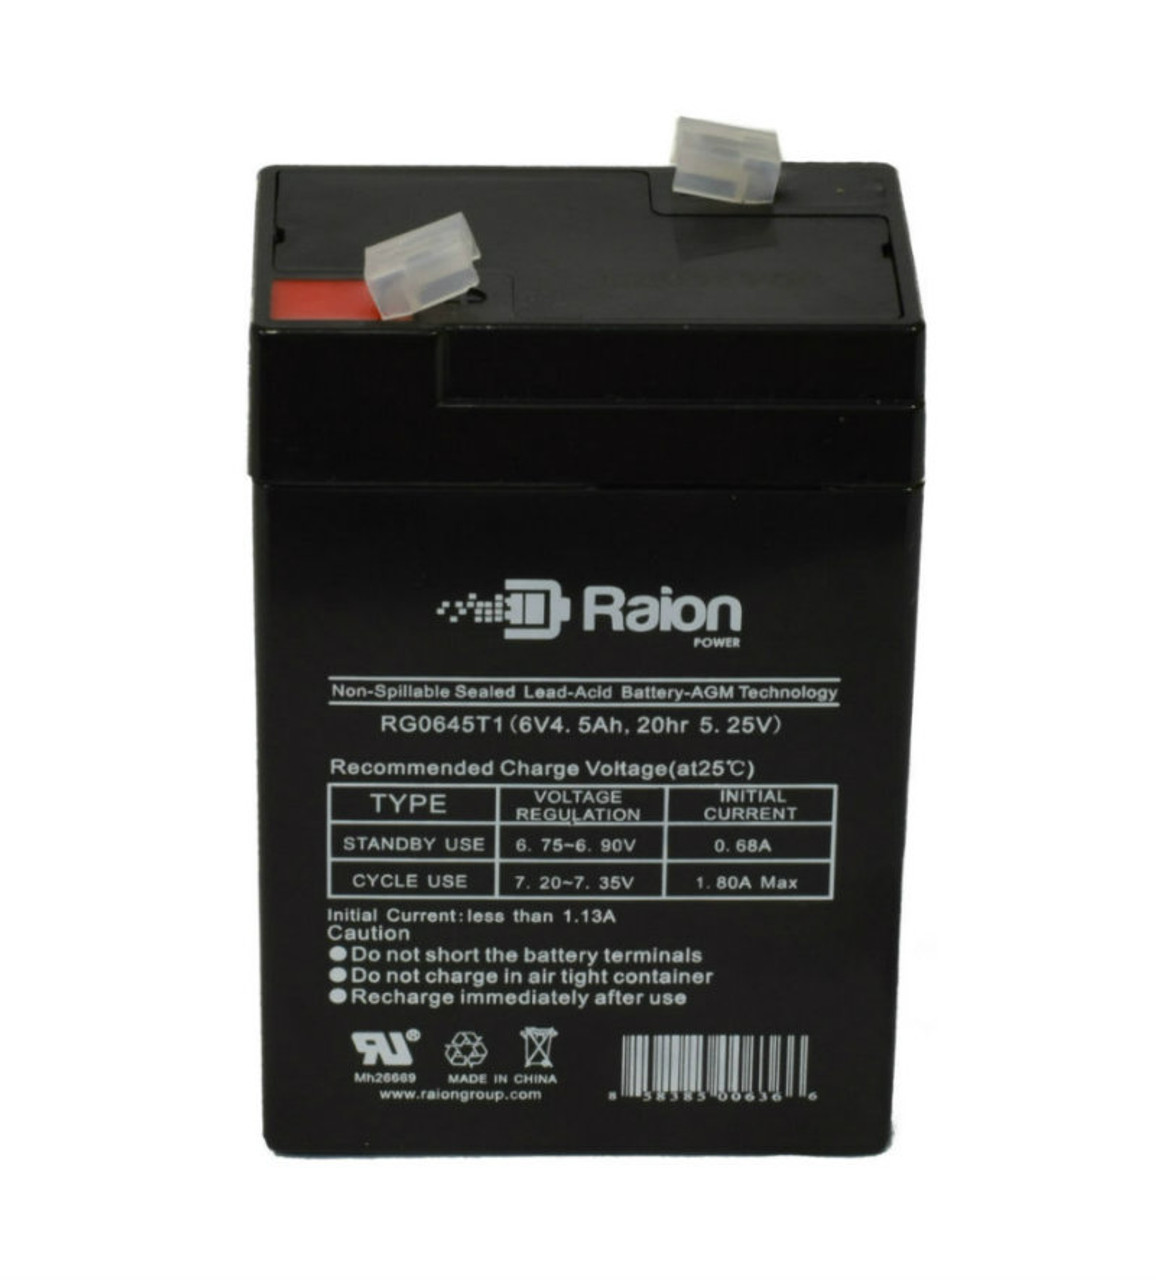 Raion Power RG0645T1 Replacement Battery Cartridge for Genesis NP4-6